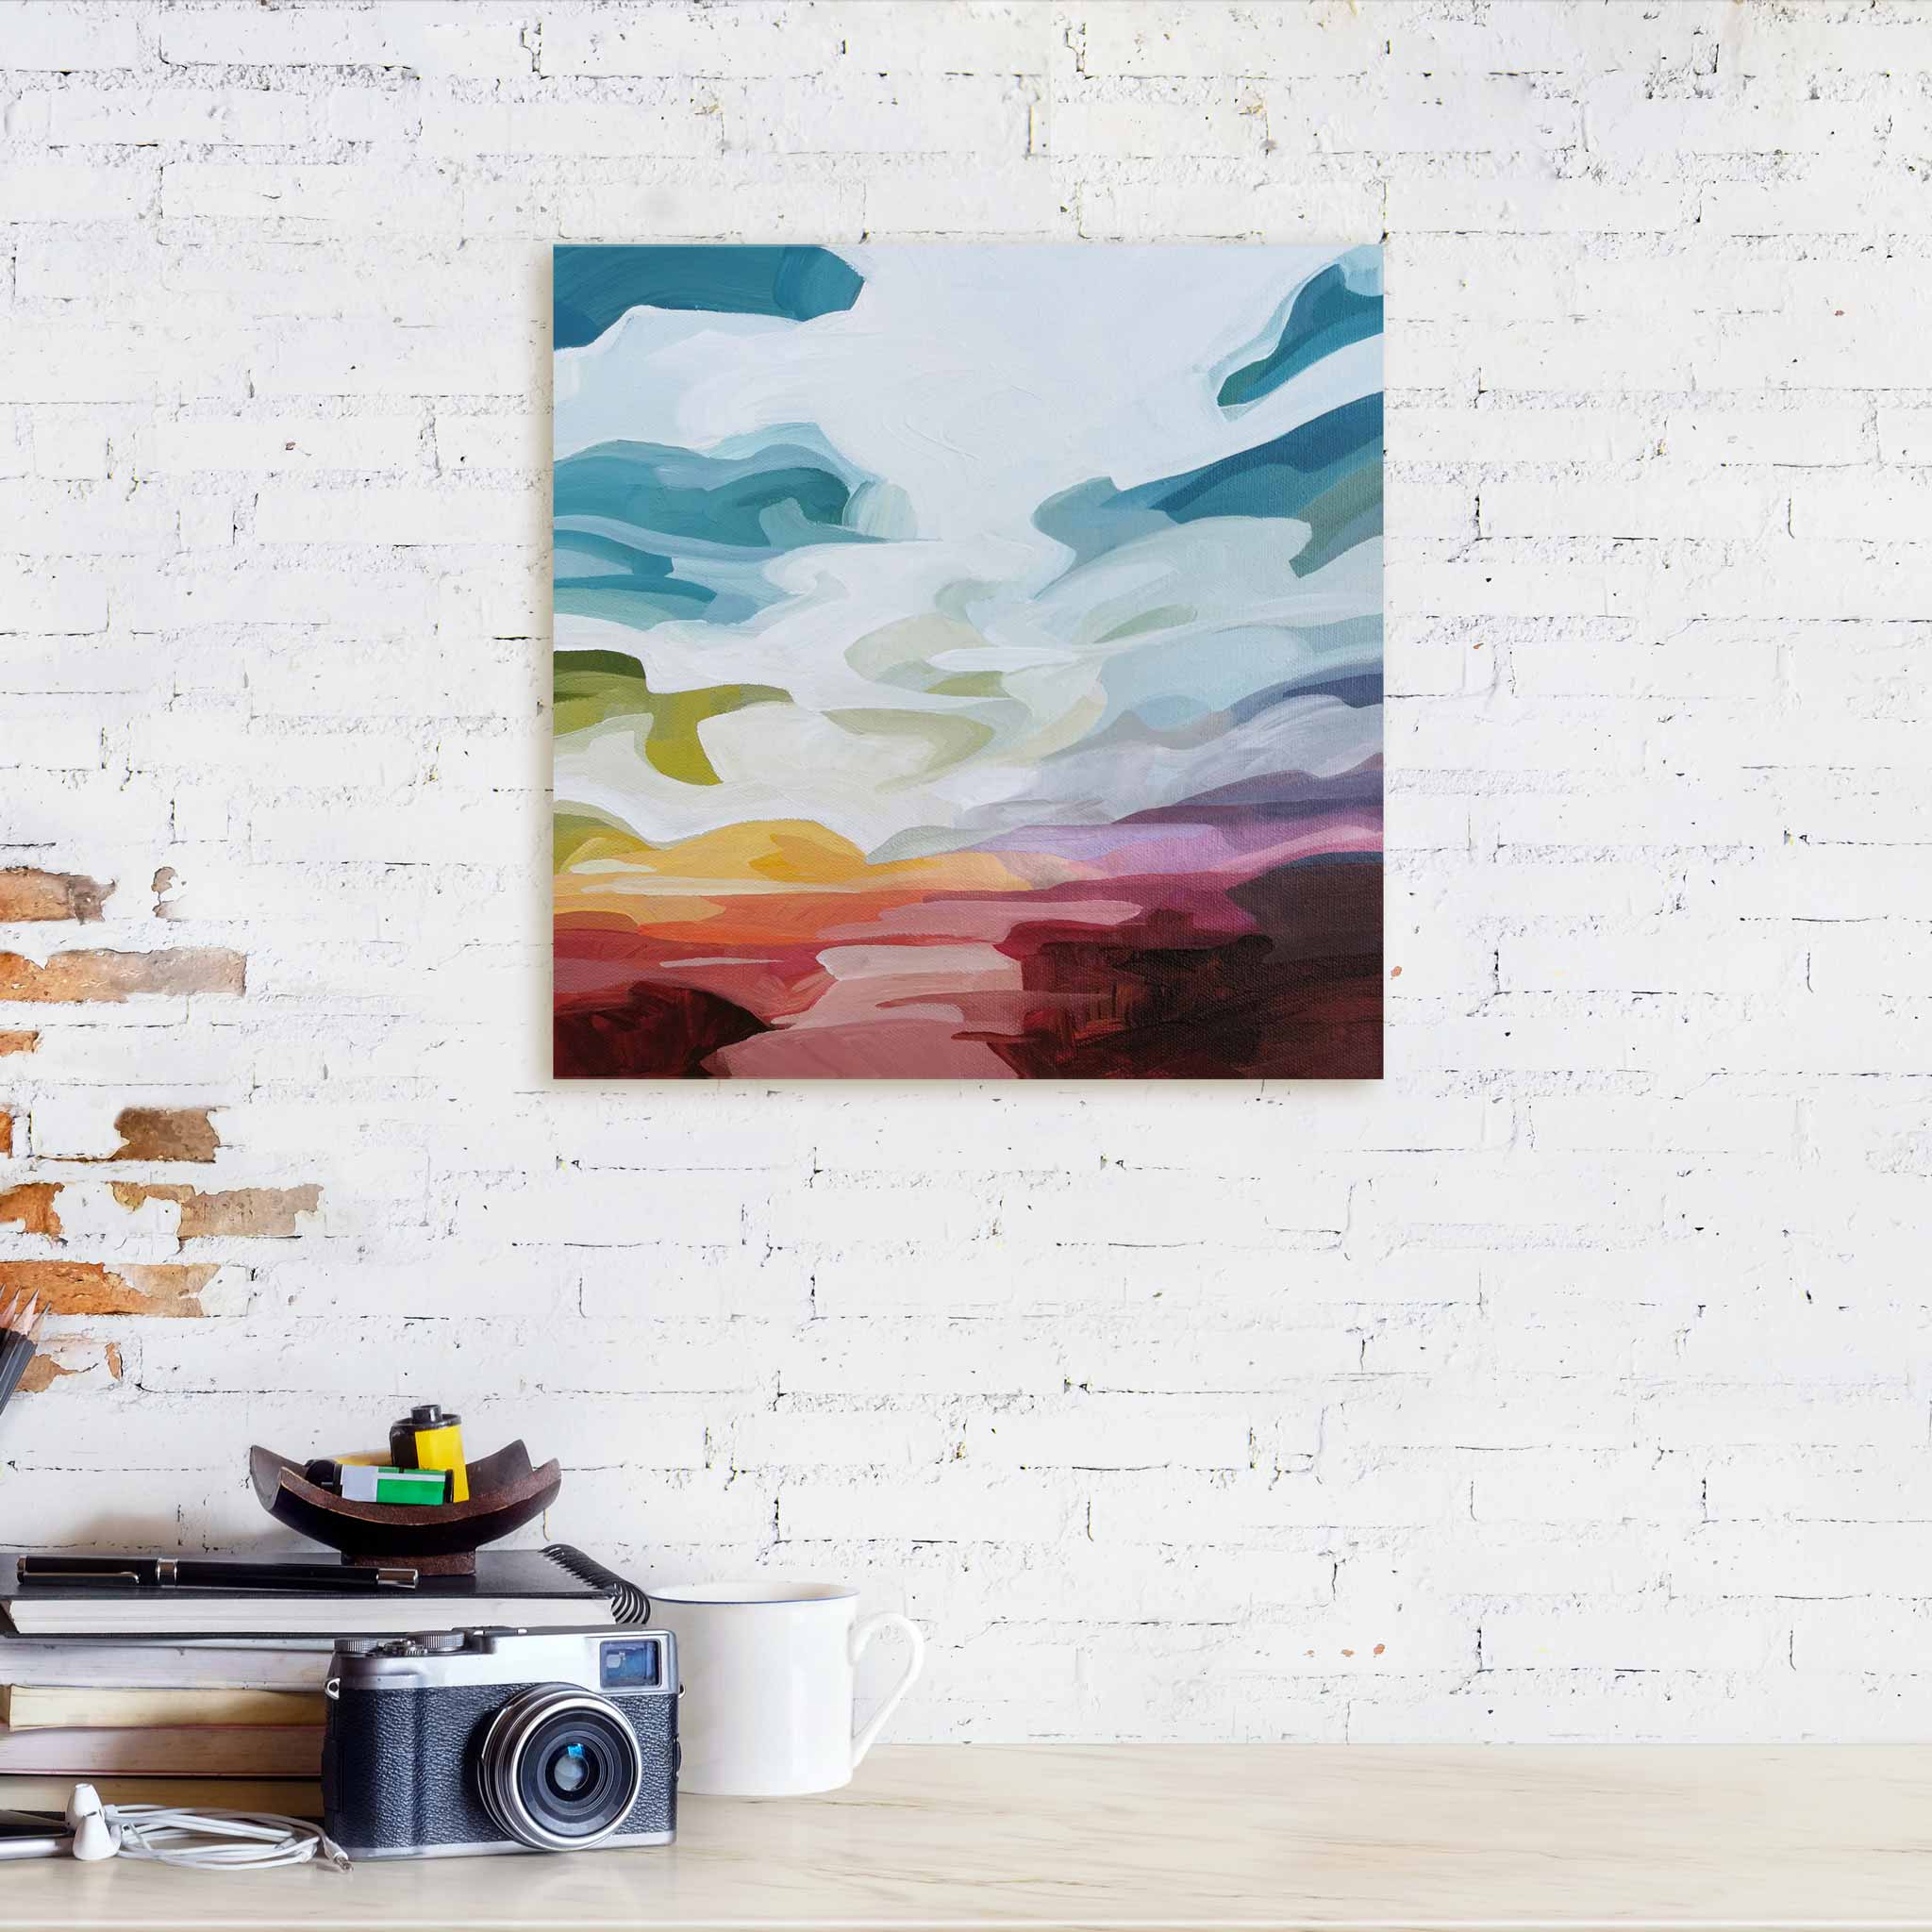 original painting on canvas of colorful sunset sky over red ground landscape acrylic paintings